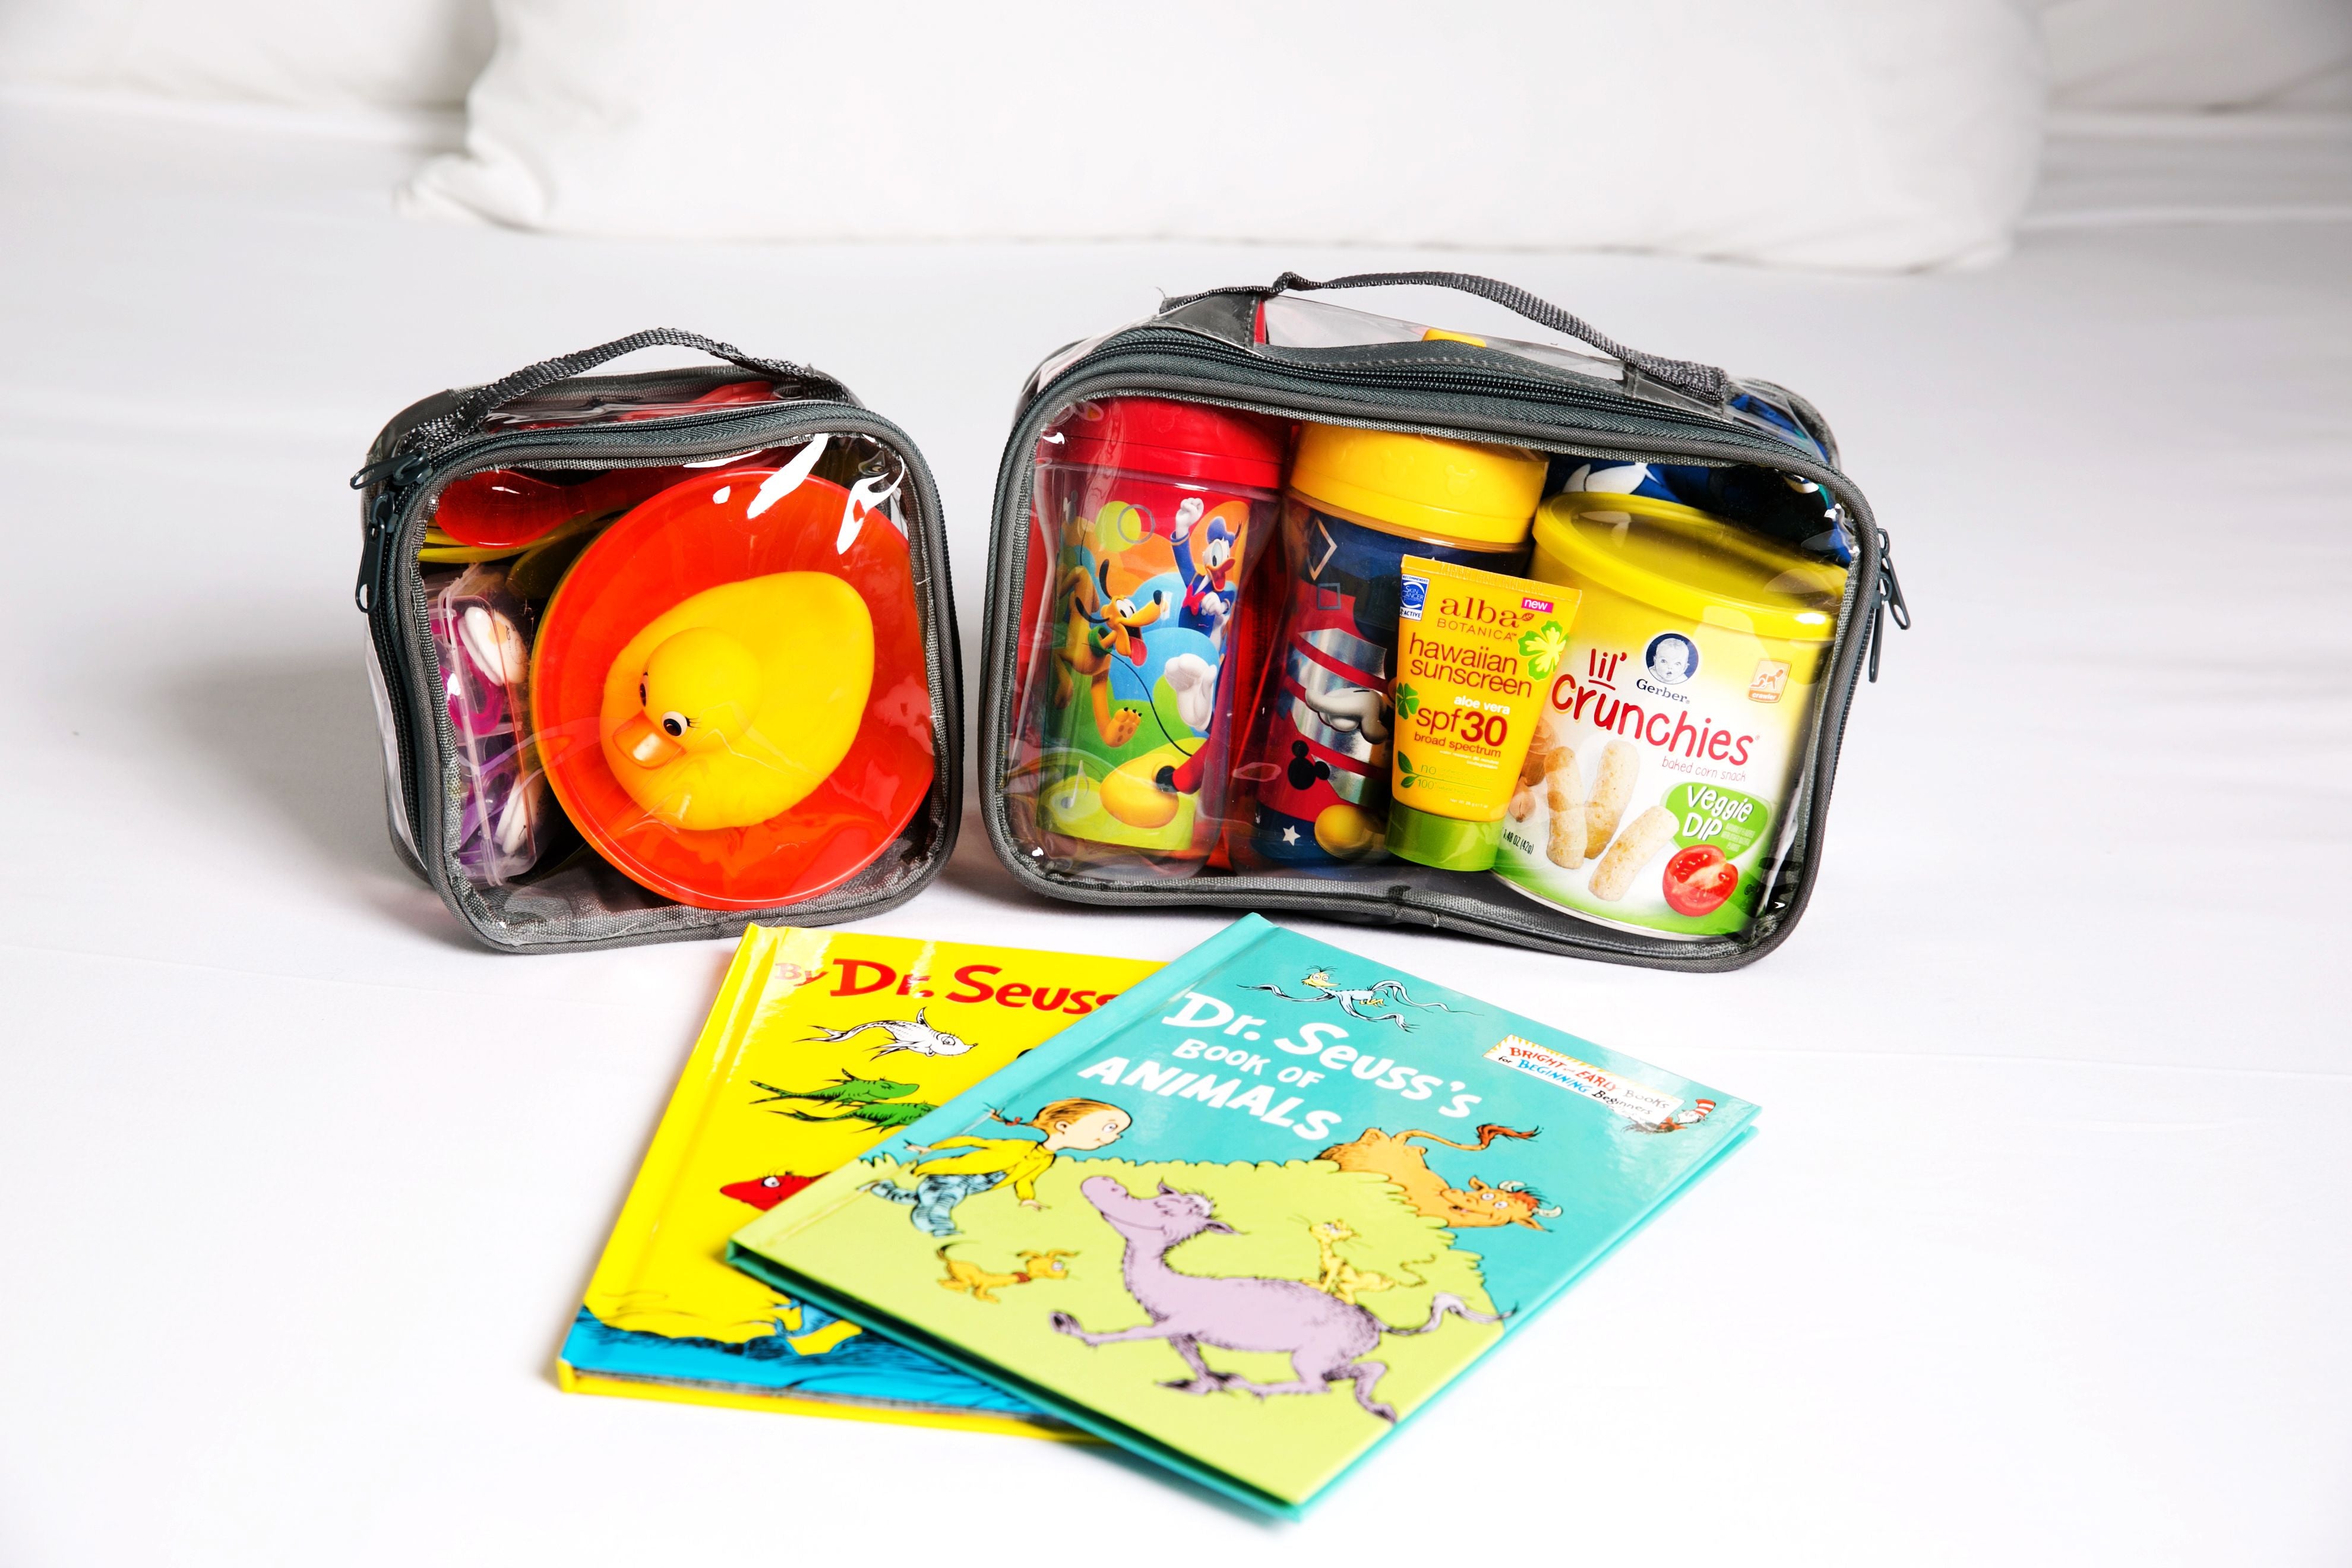 Kid's story books and essentials in packing cubes